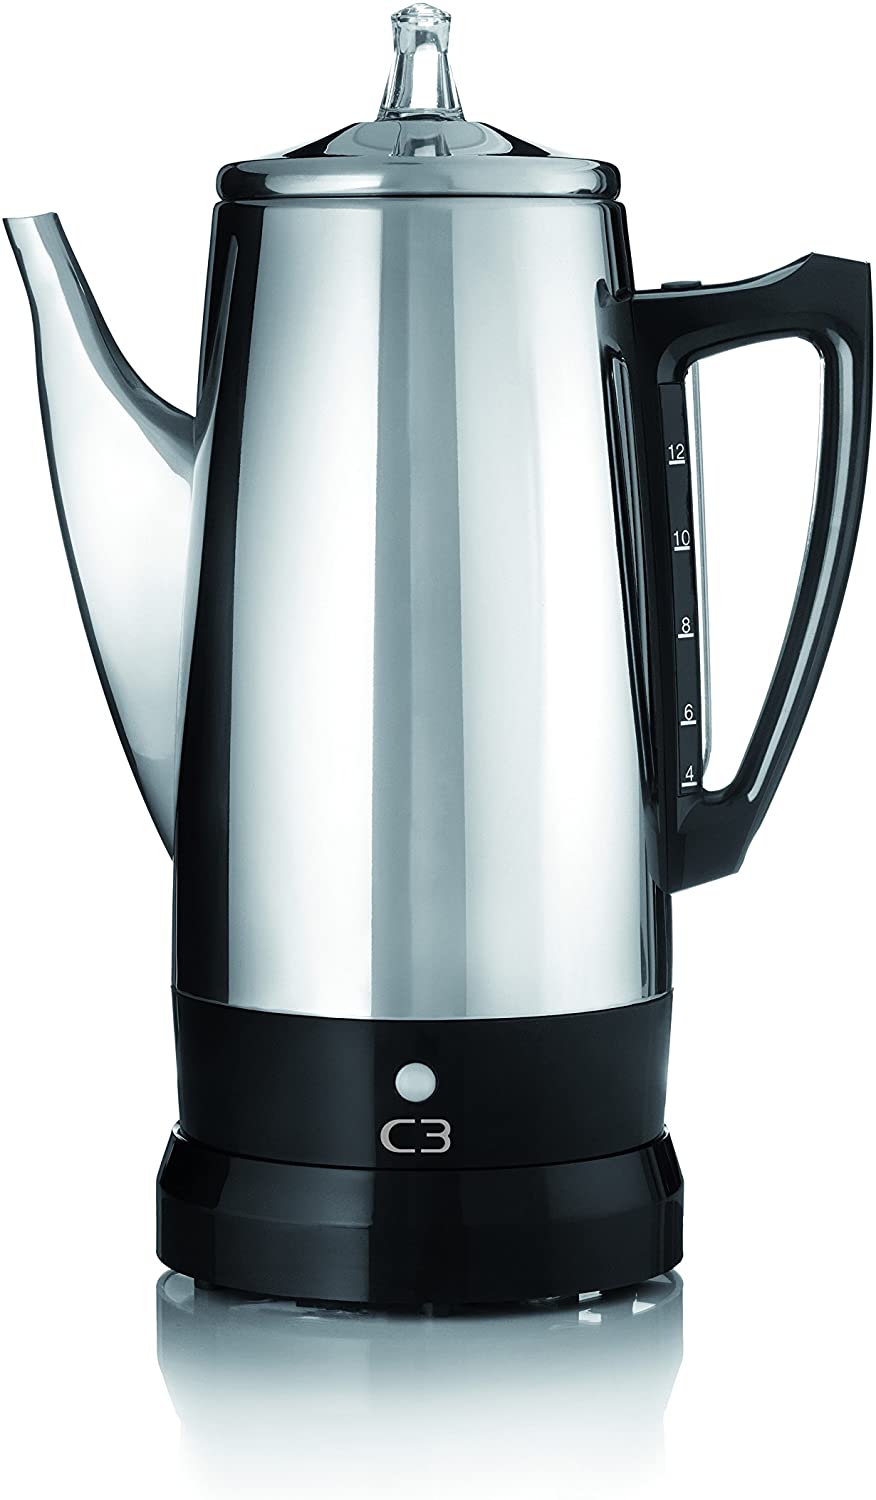 C3 Percolator, stainless steel, silver